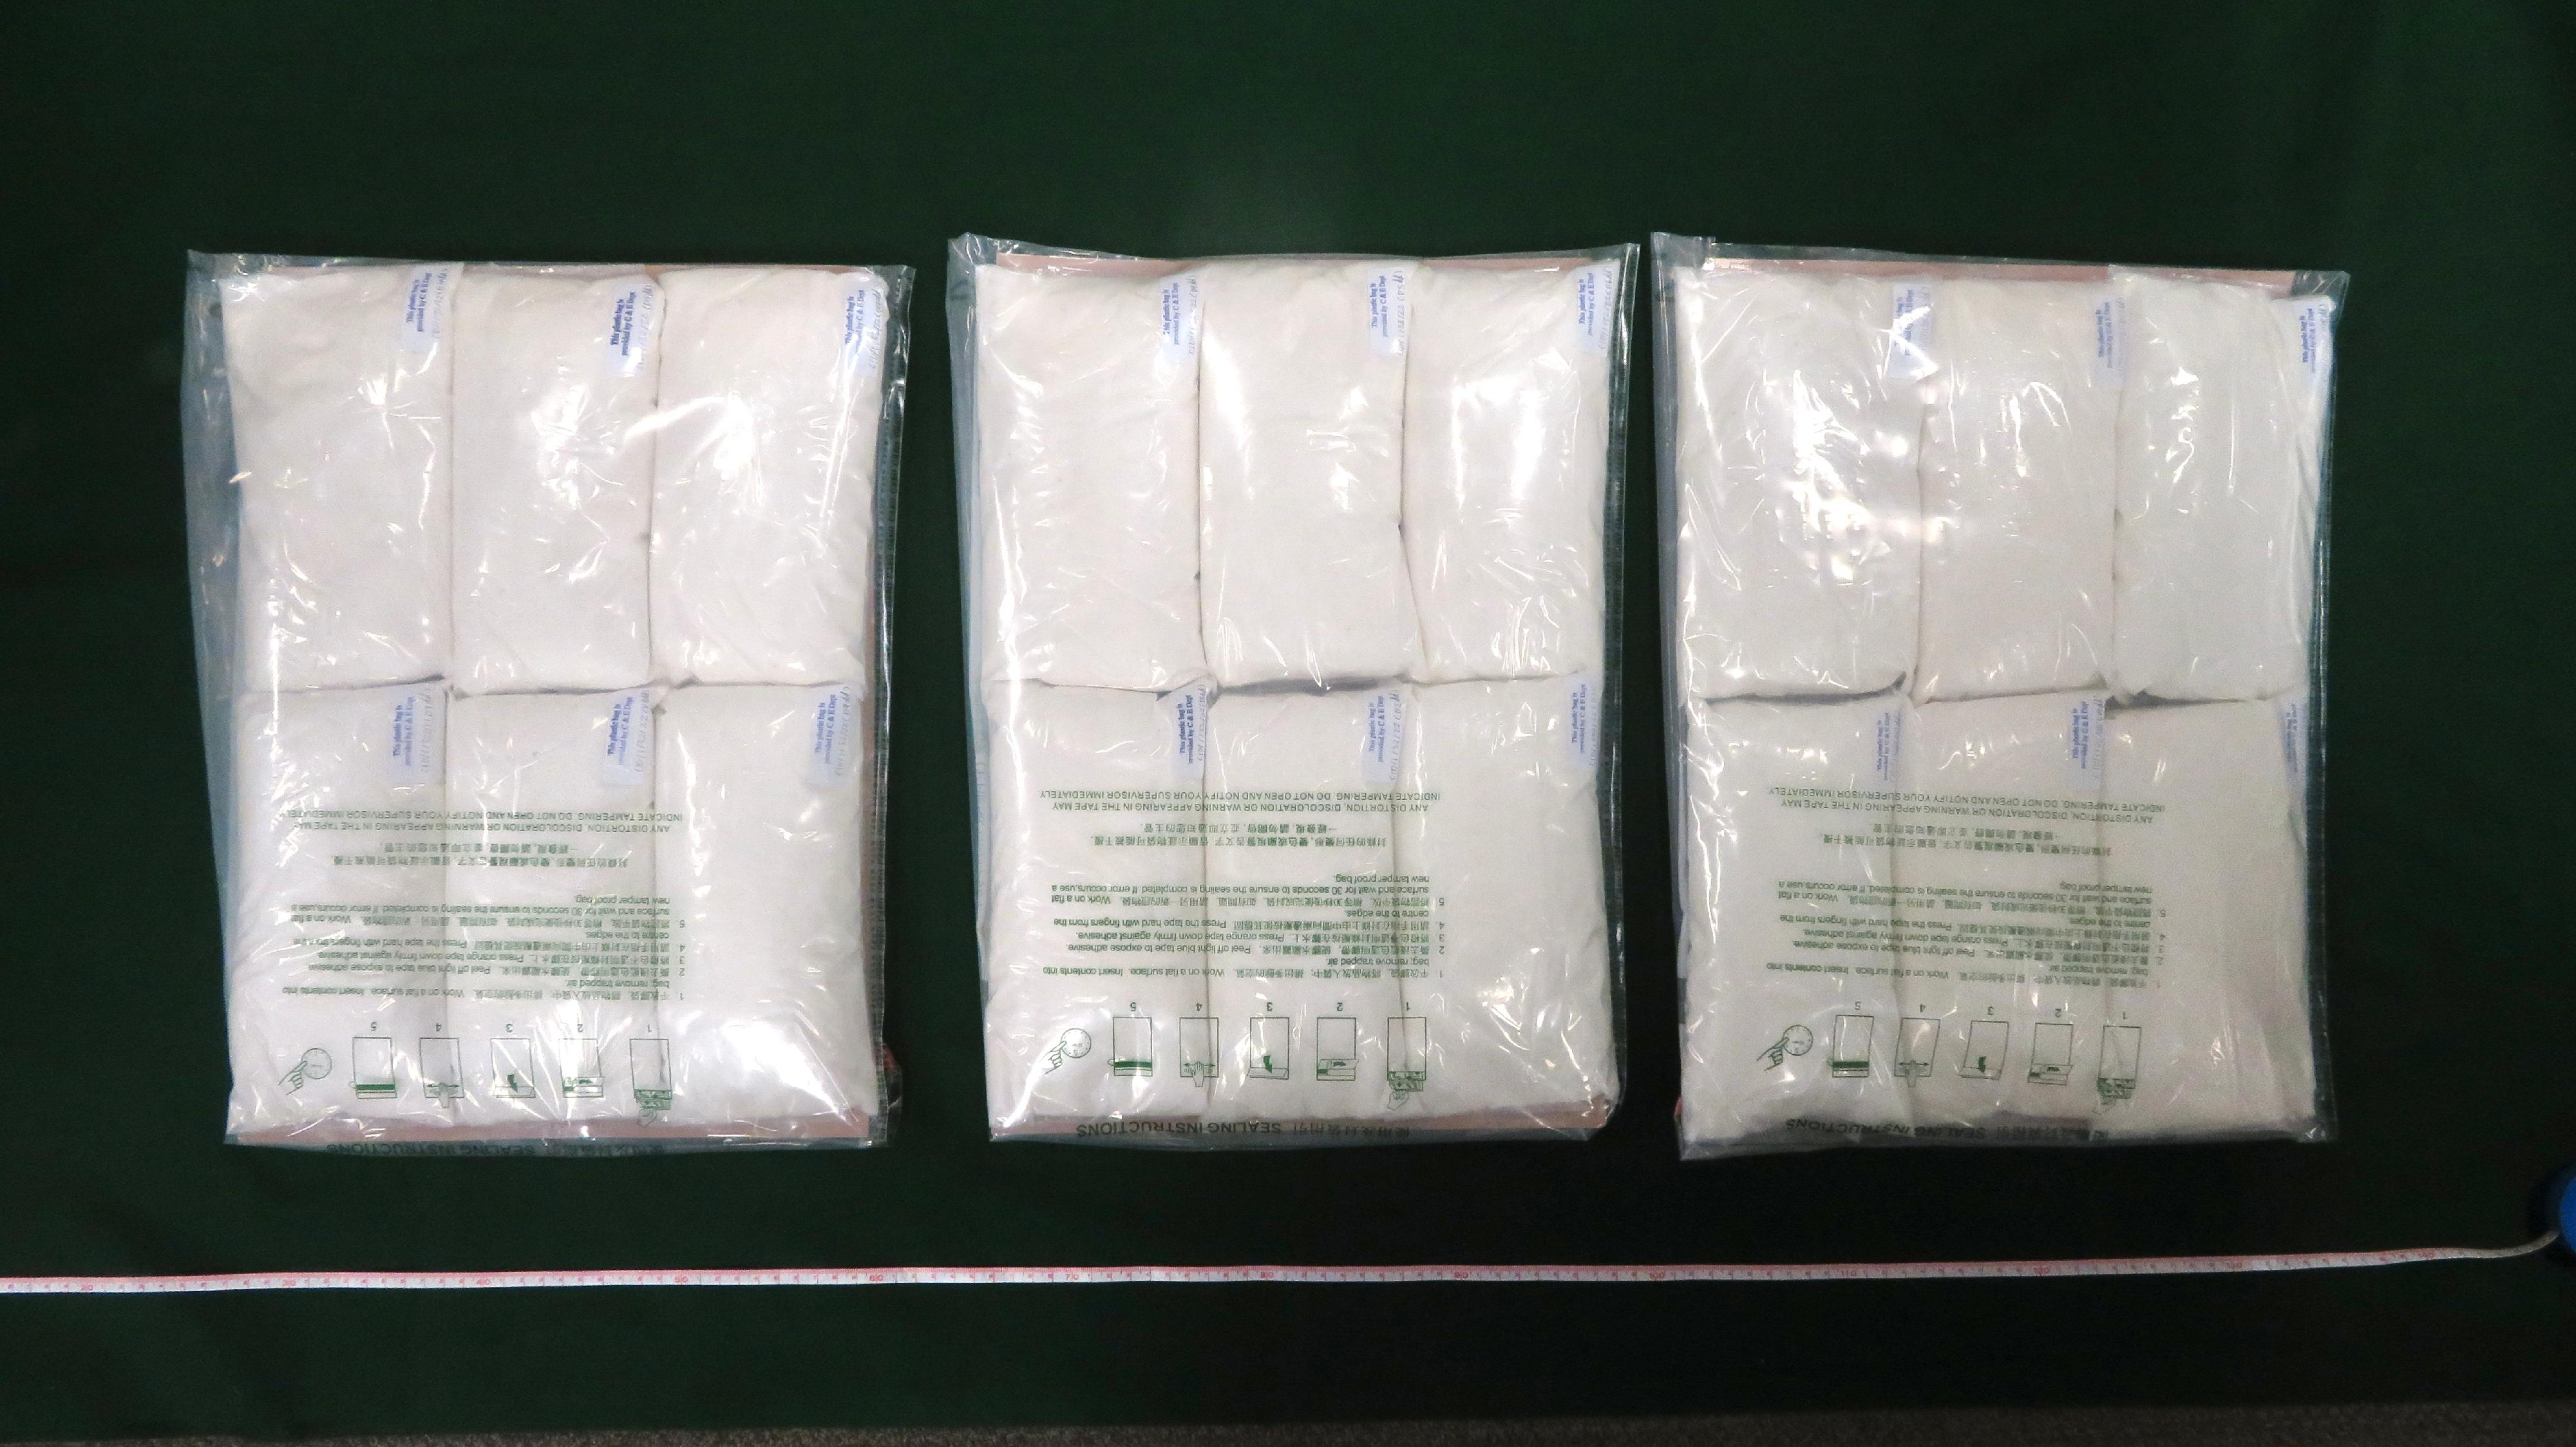 Hong Kong Customs yesterday (October 24) seized about 9 kilograms of suspected ketamine with an estimated market value of about $5.2 million in Tsuen Wan. Photo shows the suspected ketamine seized.